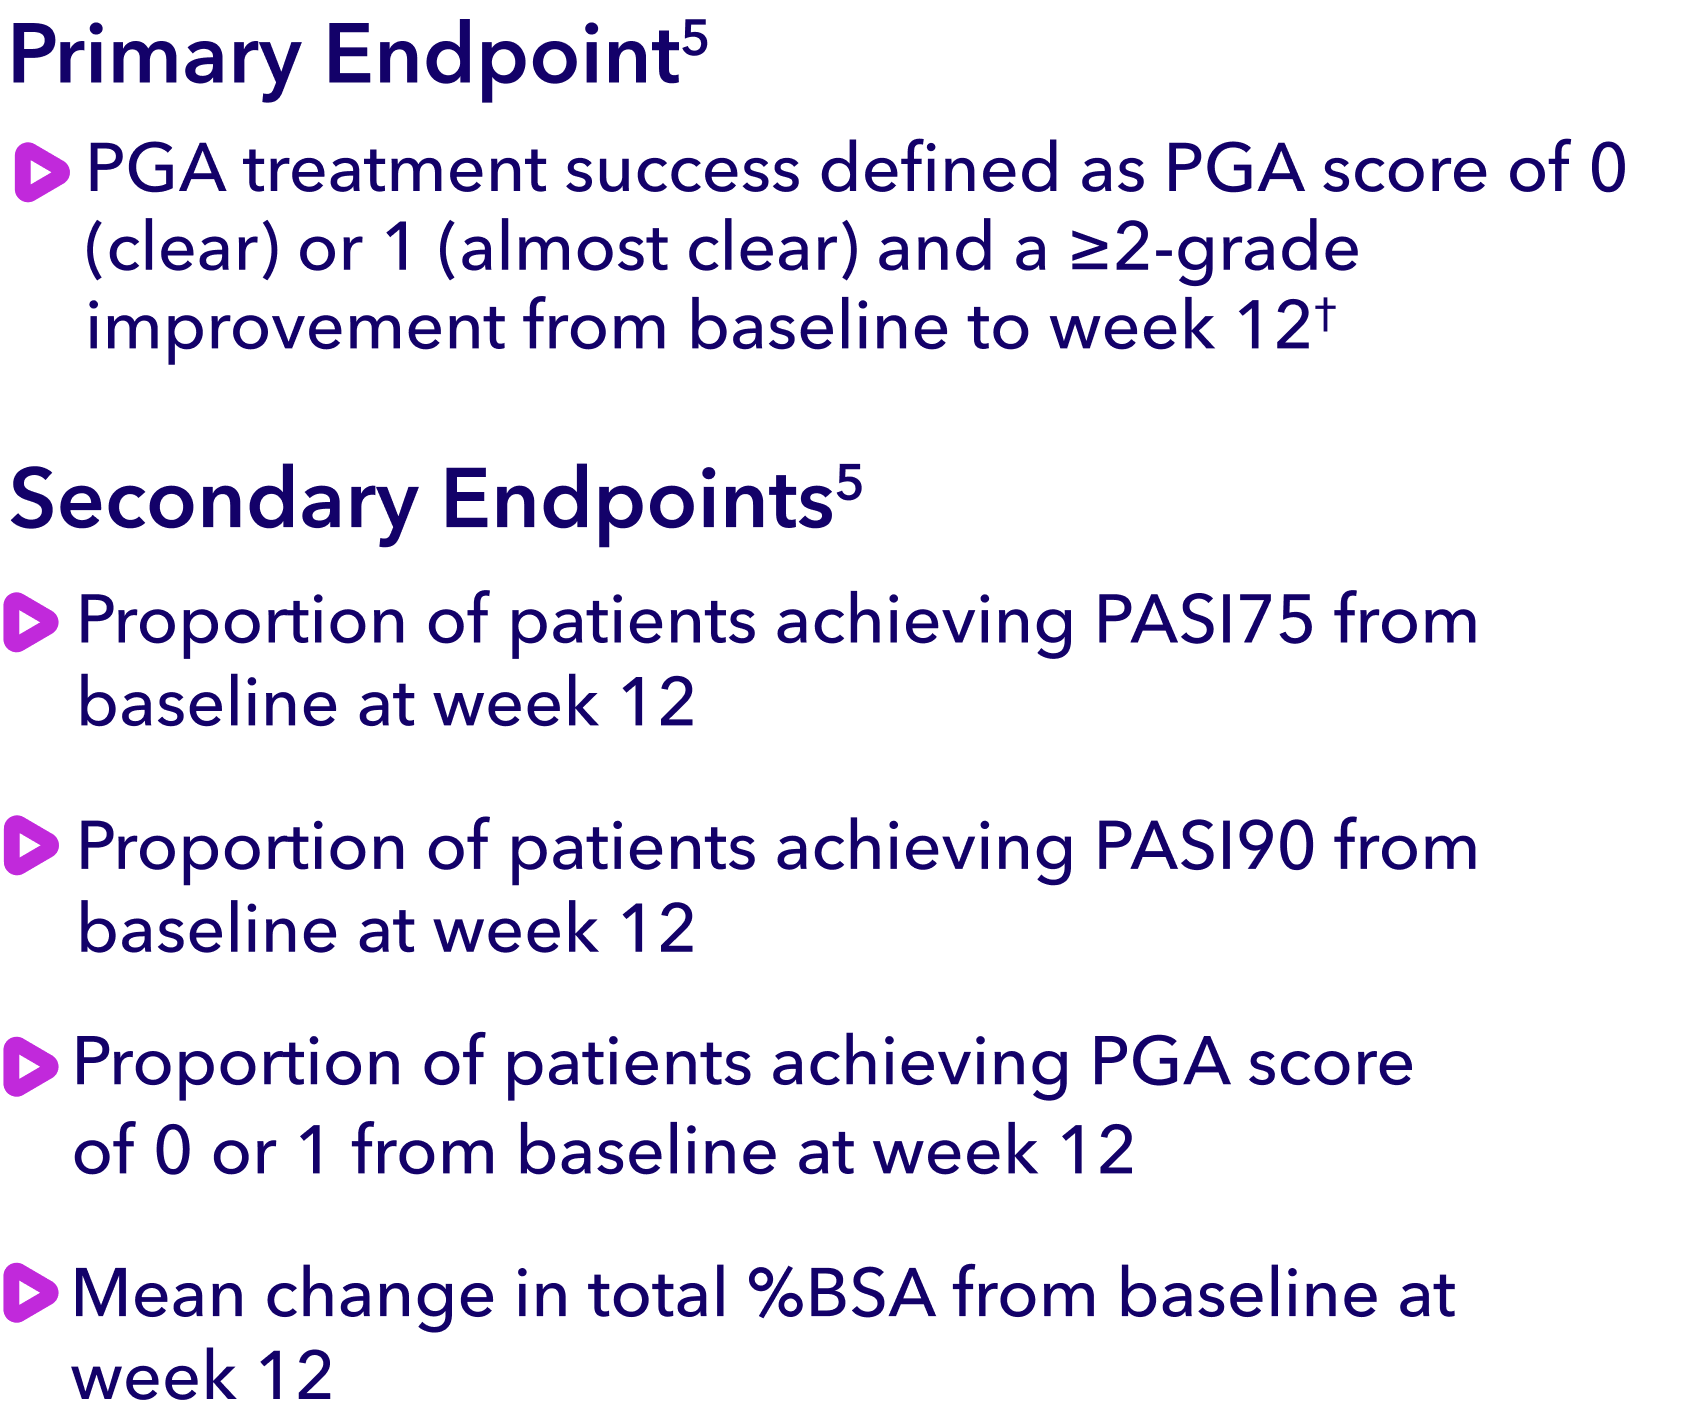 Study design and primary endpoints for double-blind studies PSOARING 1 and PSOARING 2.